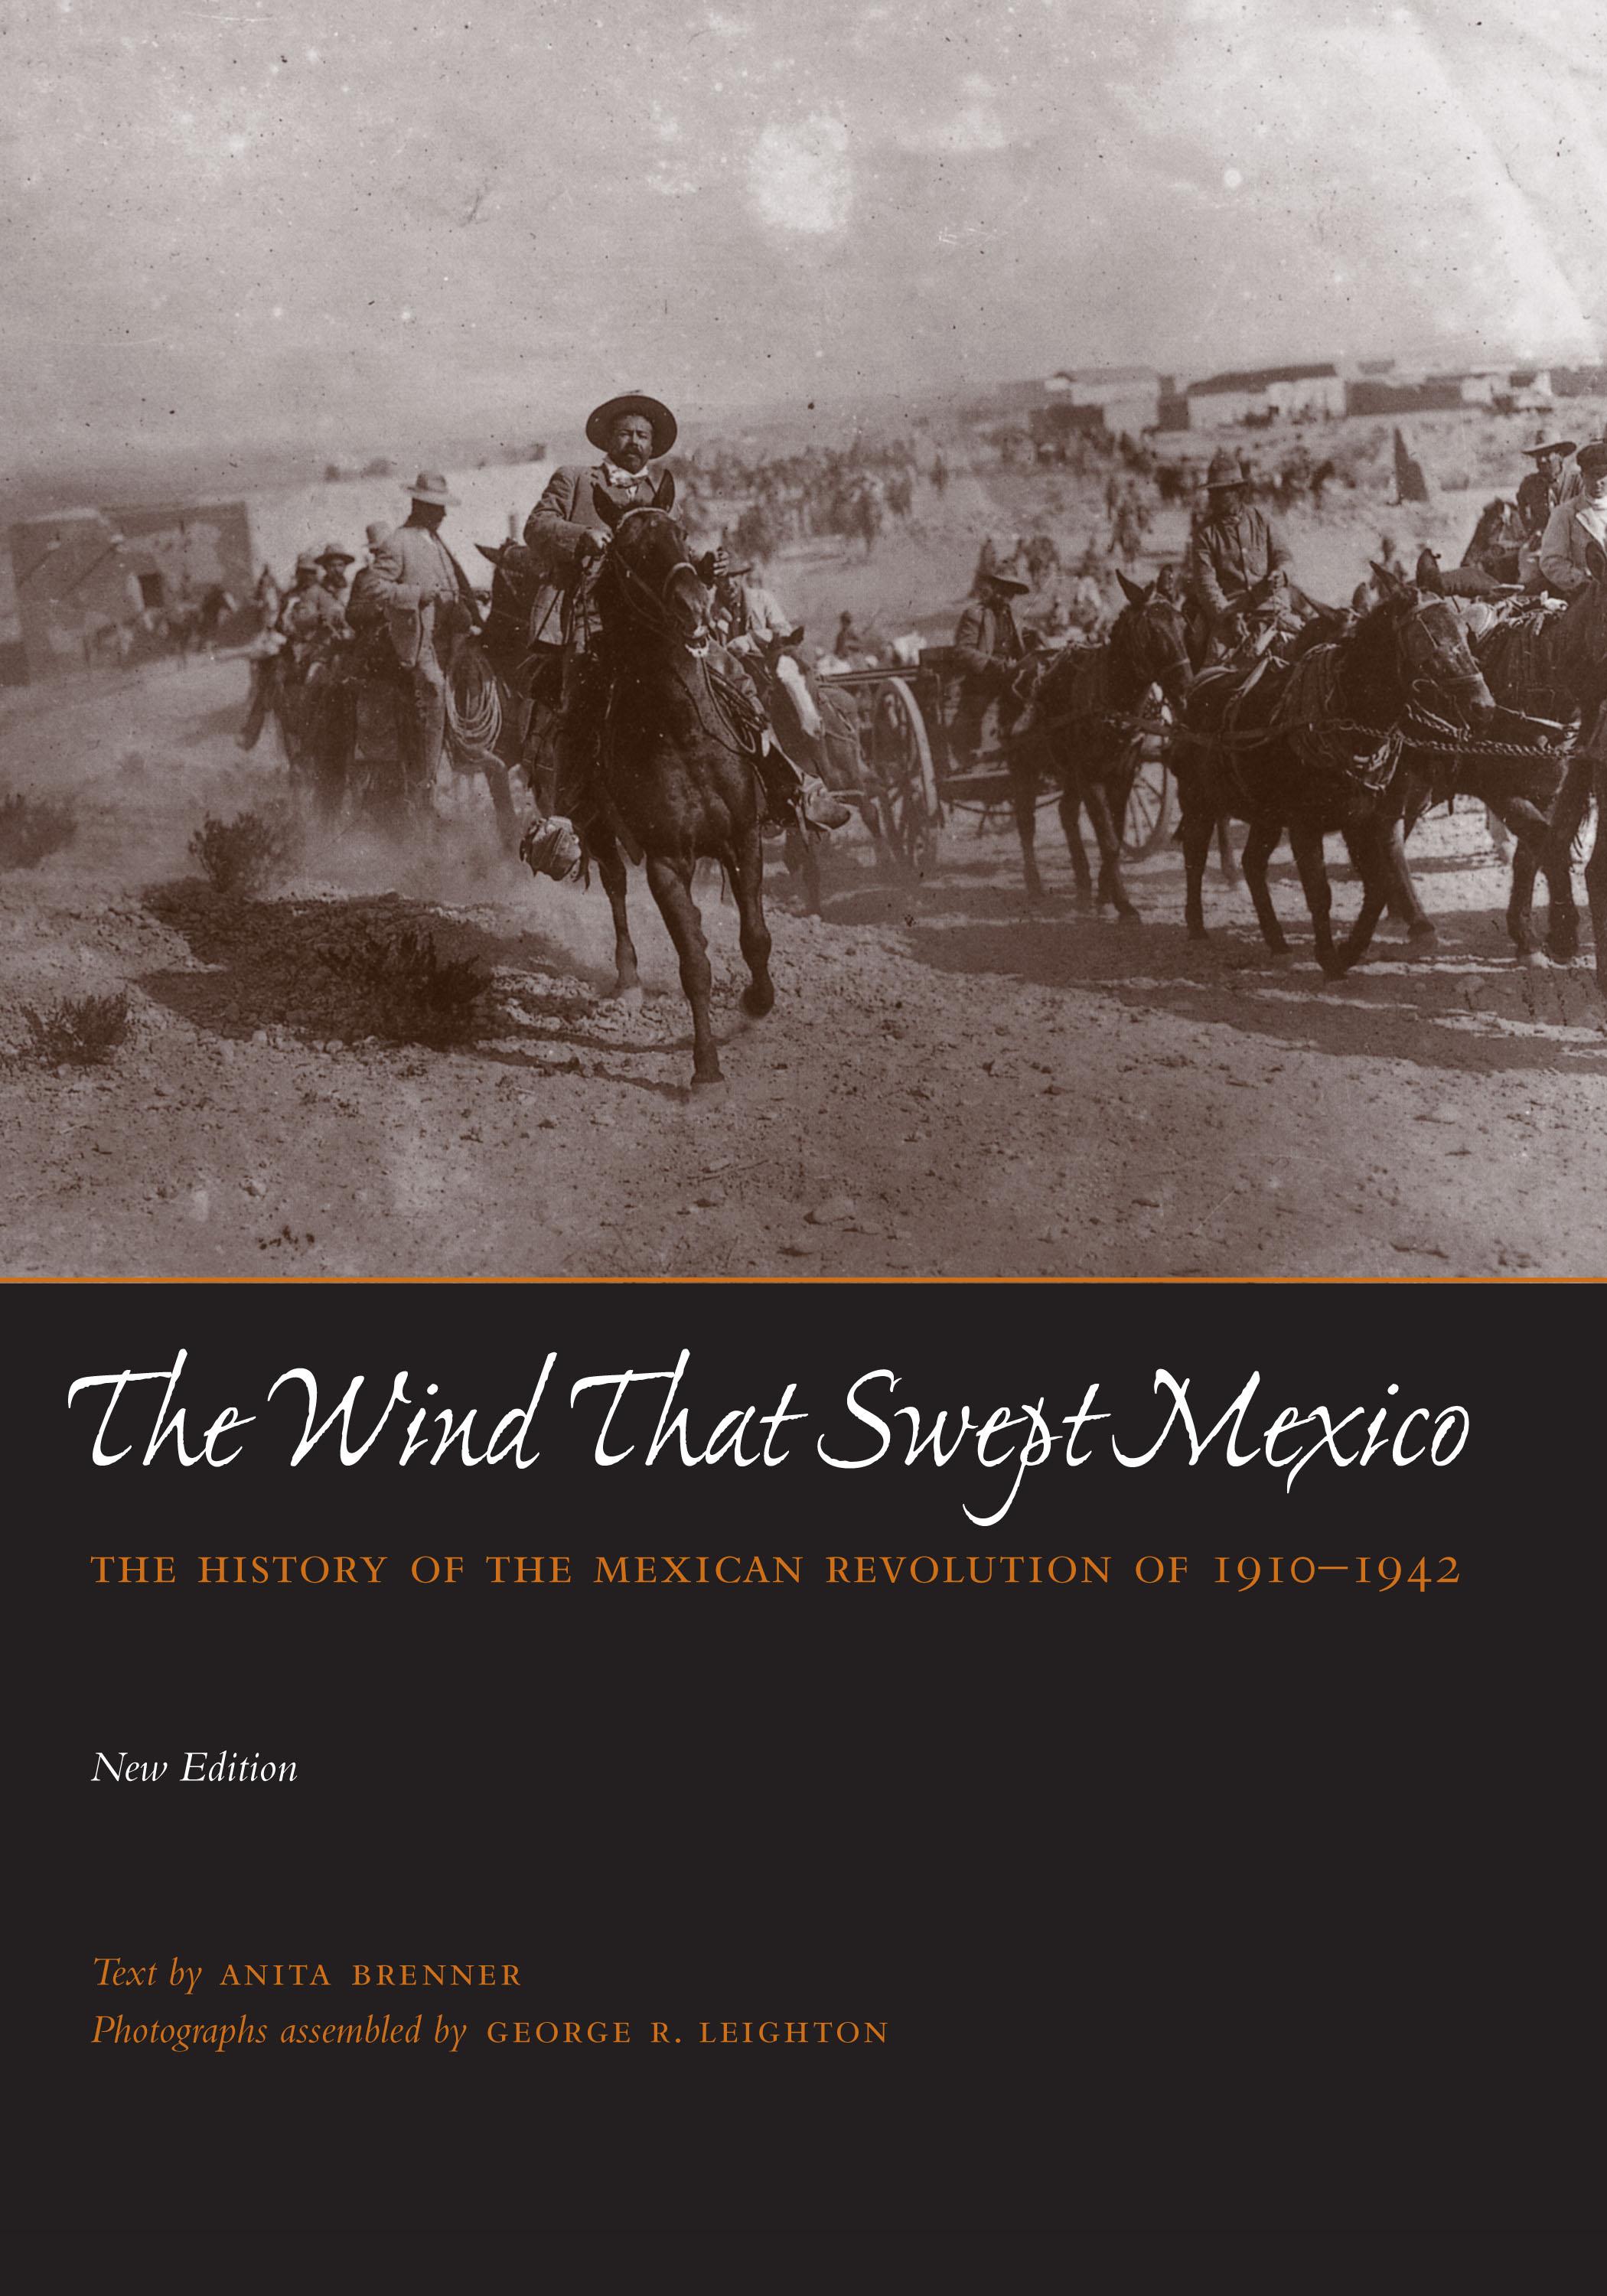 The Wind that Swept Mexico